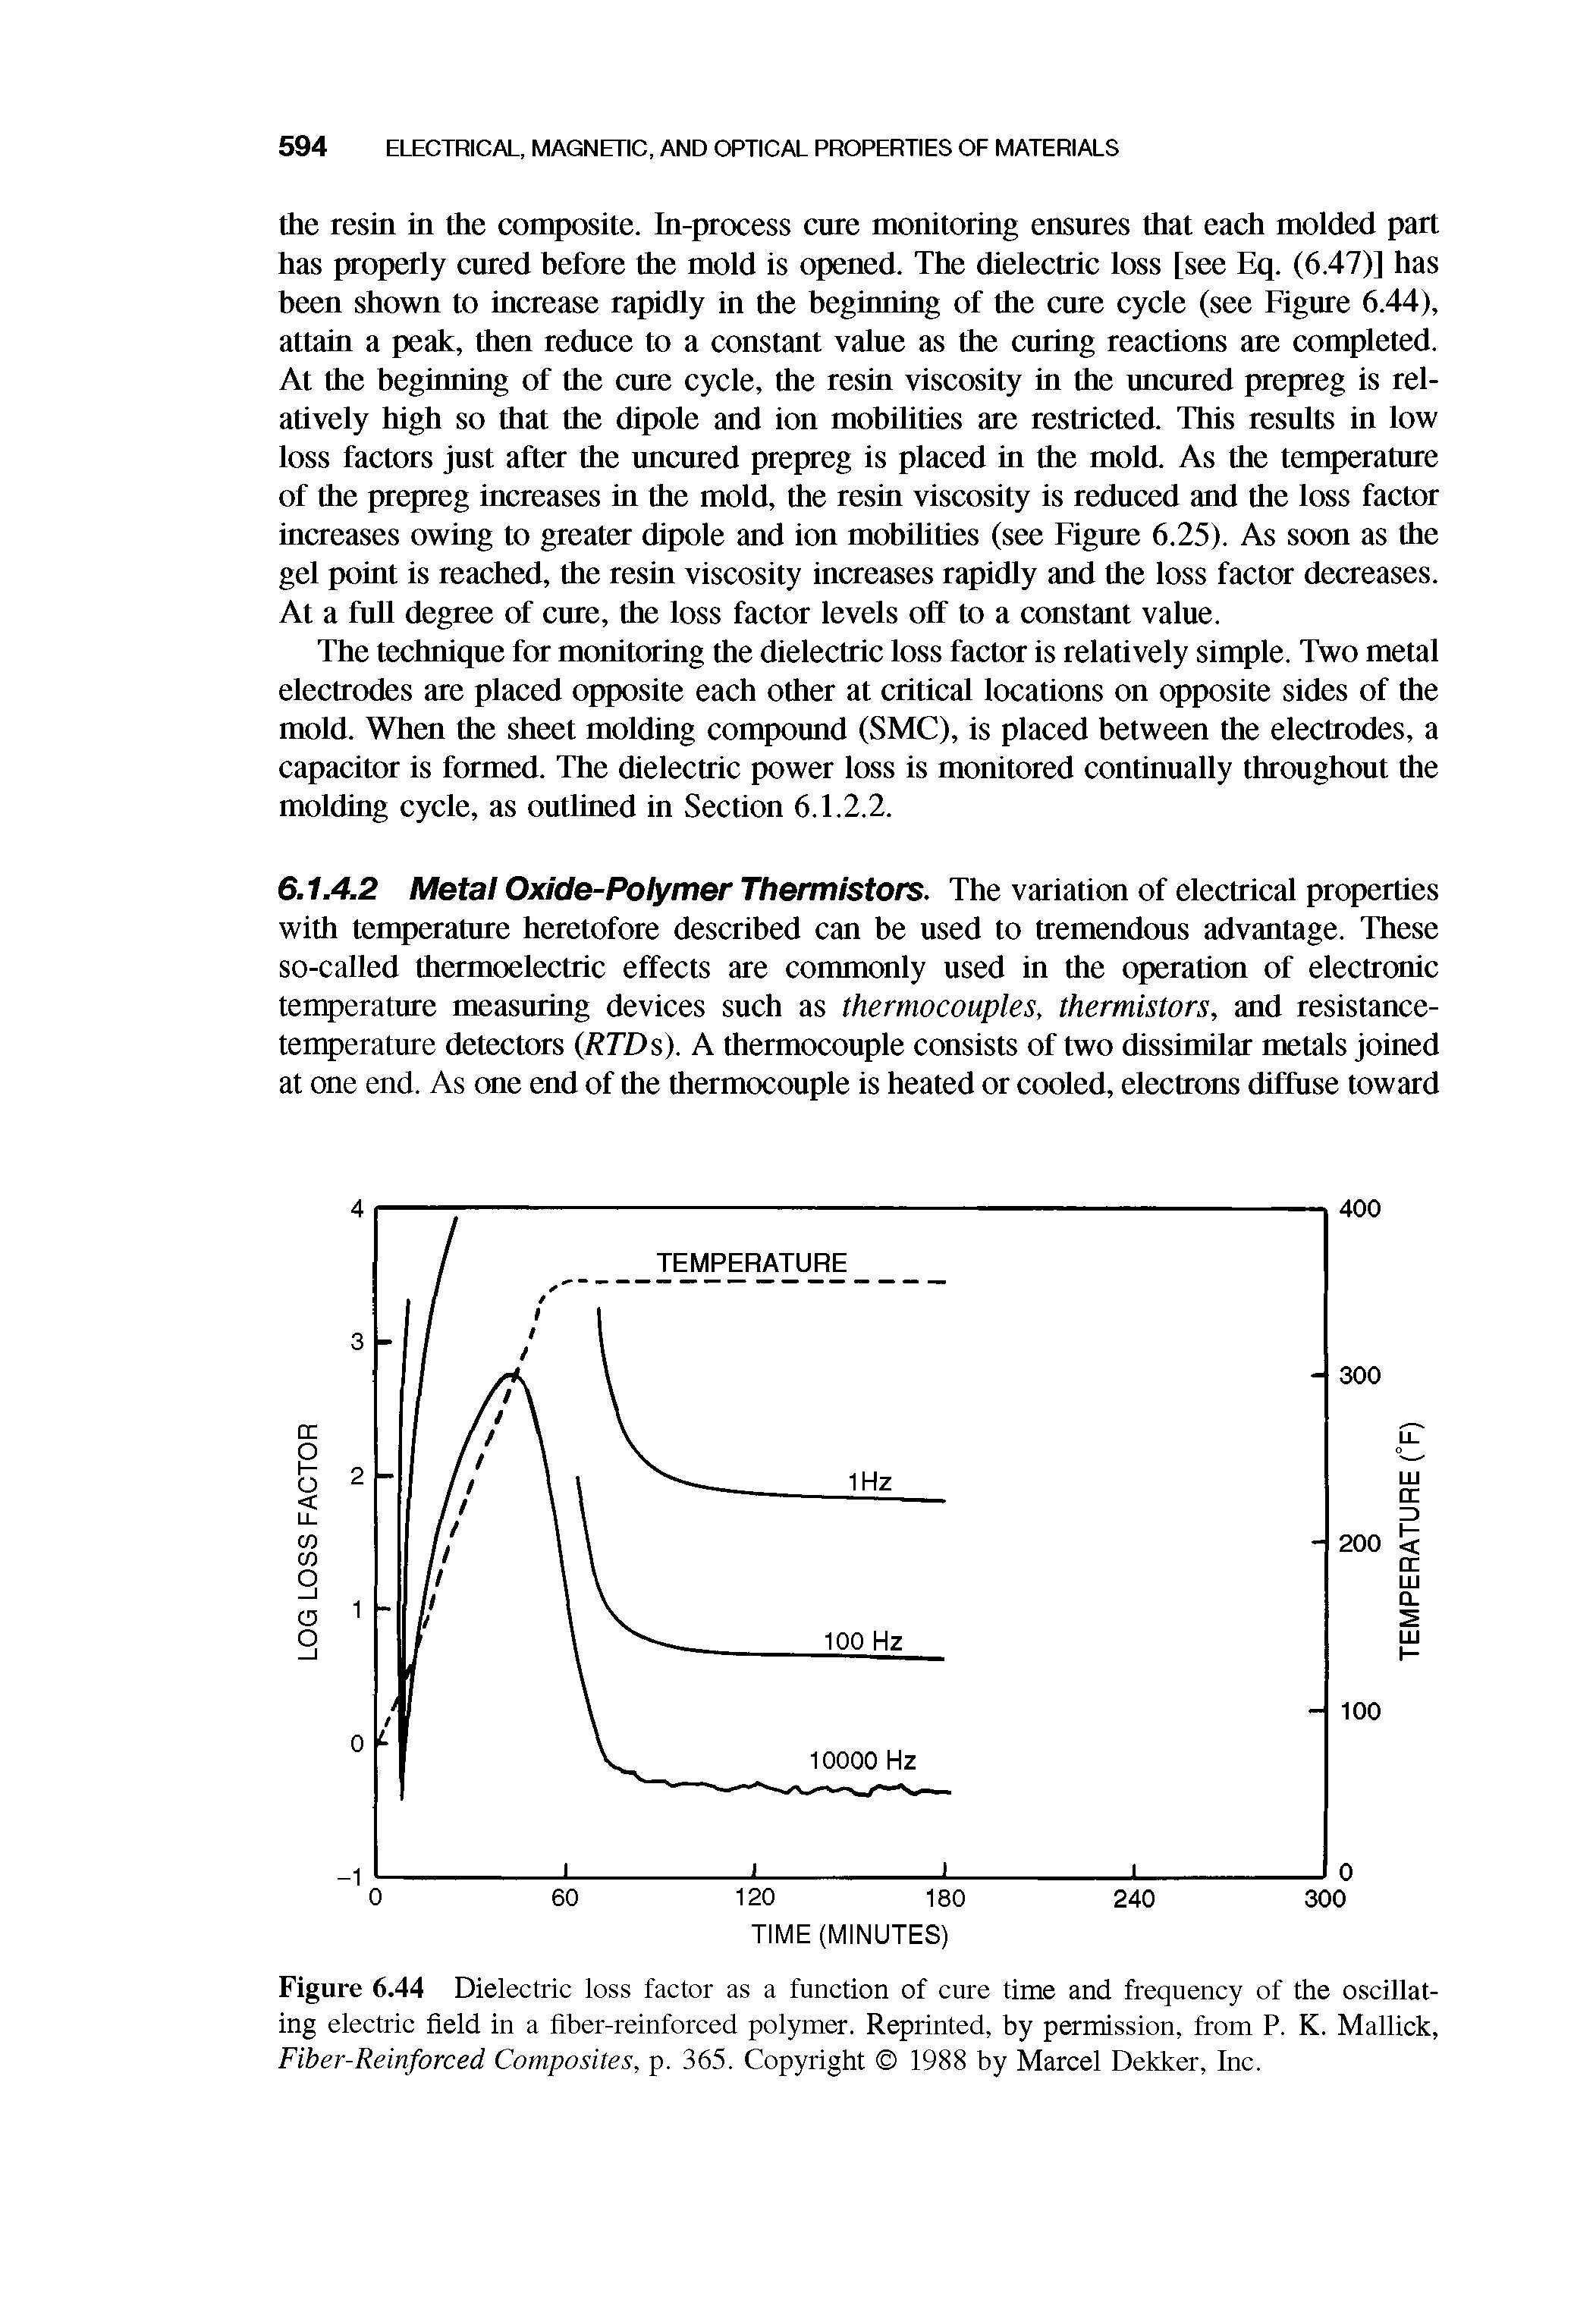 Figure 6.44 Dielectric loss factor as a function of cure time and frequency of the oscillating electric field in a fiber-reinforced polymer. Reprinted, by permission, from P. K. Mallick, Fiber-Reinforced Composites, p. 365. Copyright 1988 by Marcel Dekker, Inc.